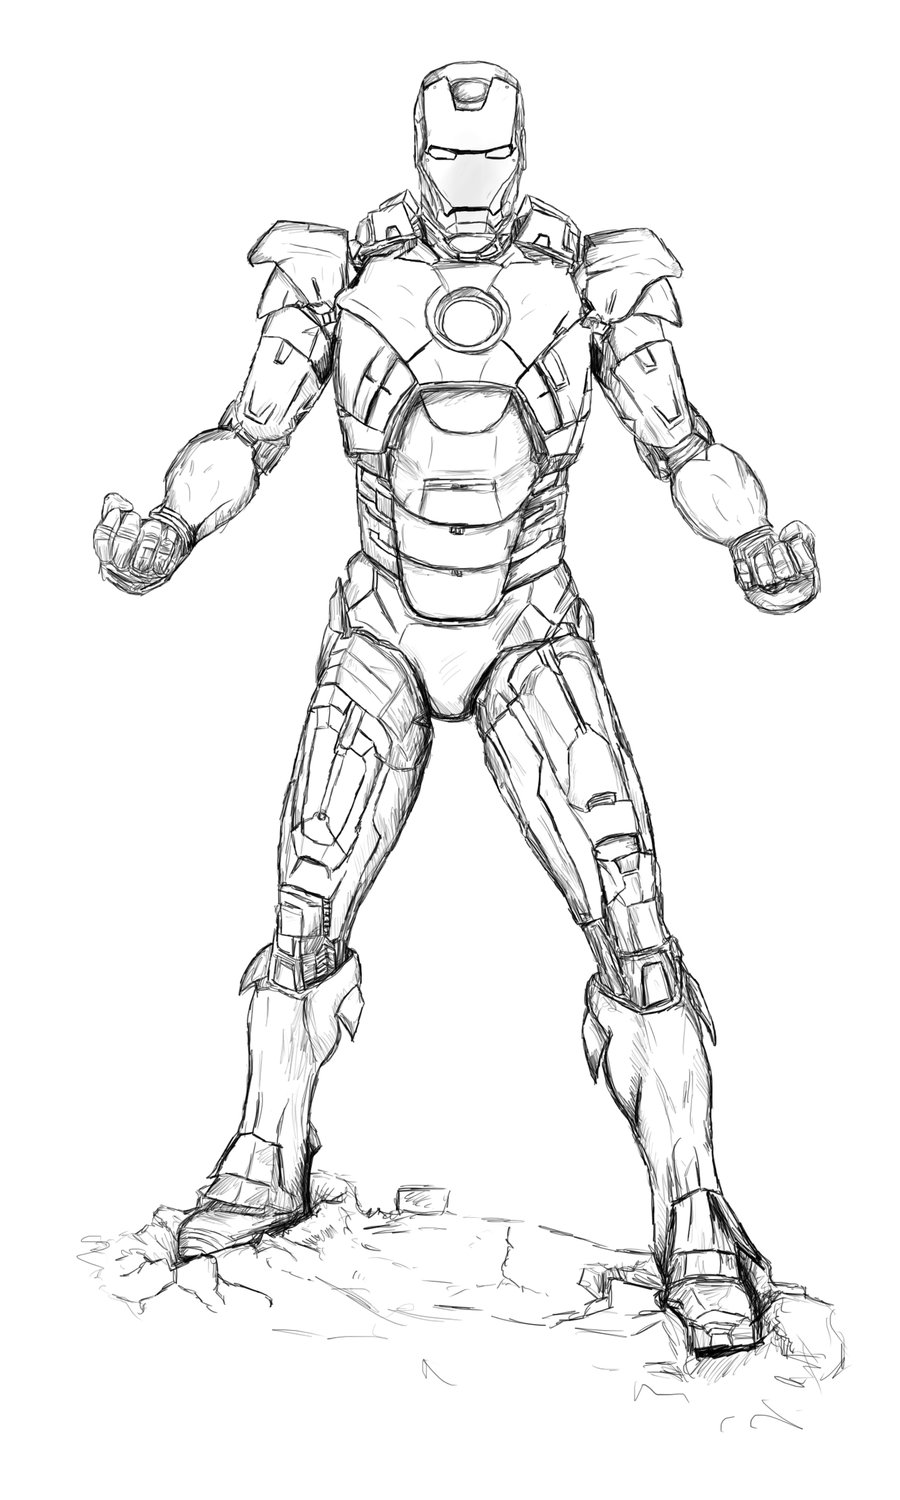  Iron Man Coloring pages | Coloring page for kids | #17